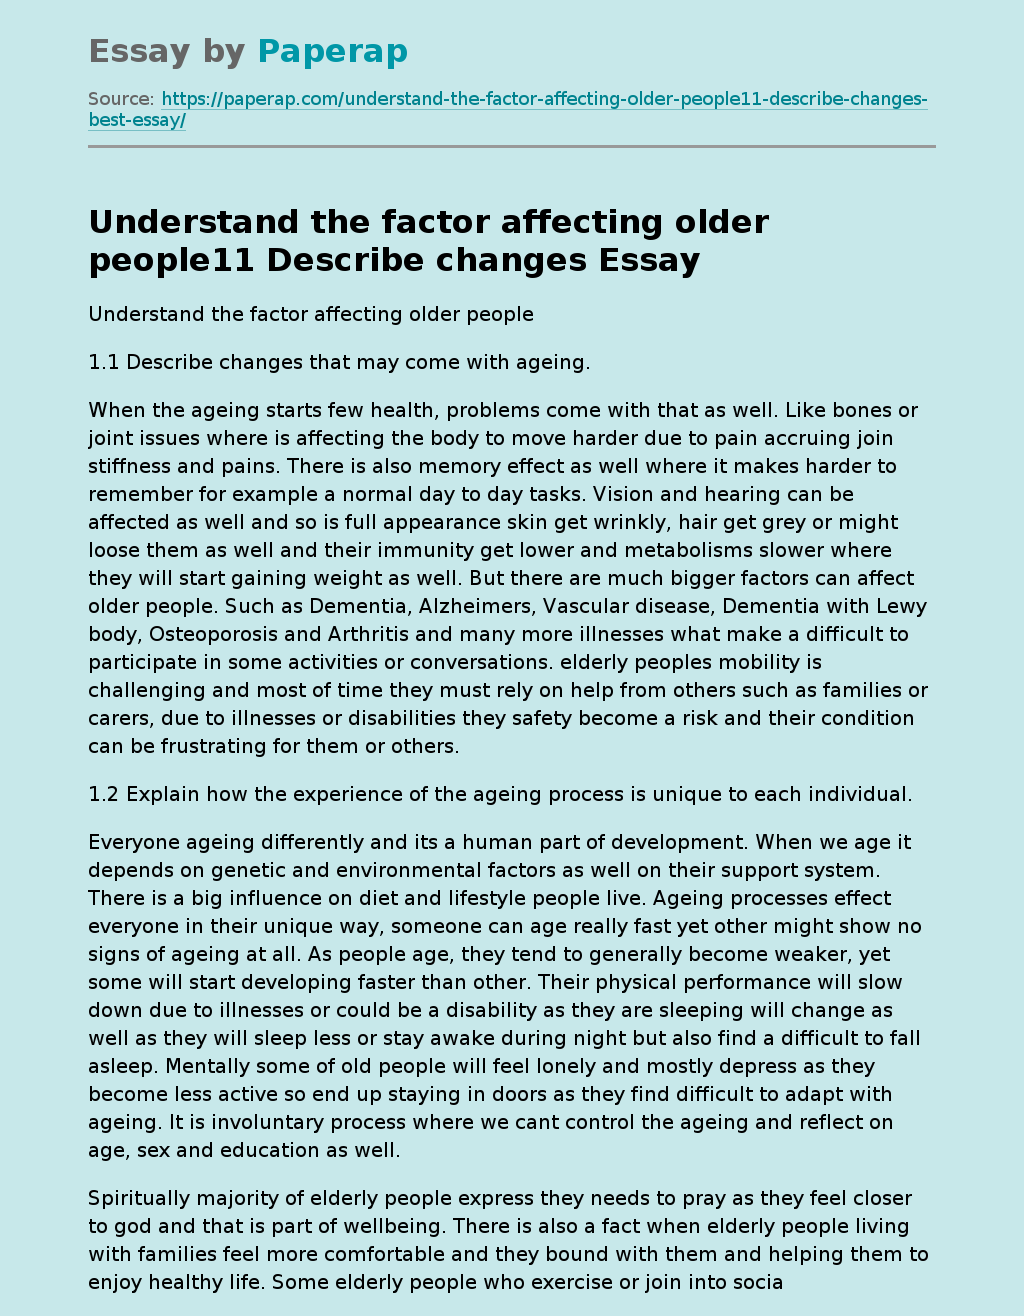 Understand the factor affecting older people11 Describe changes